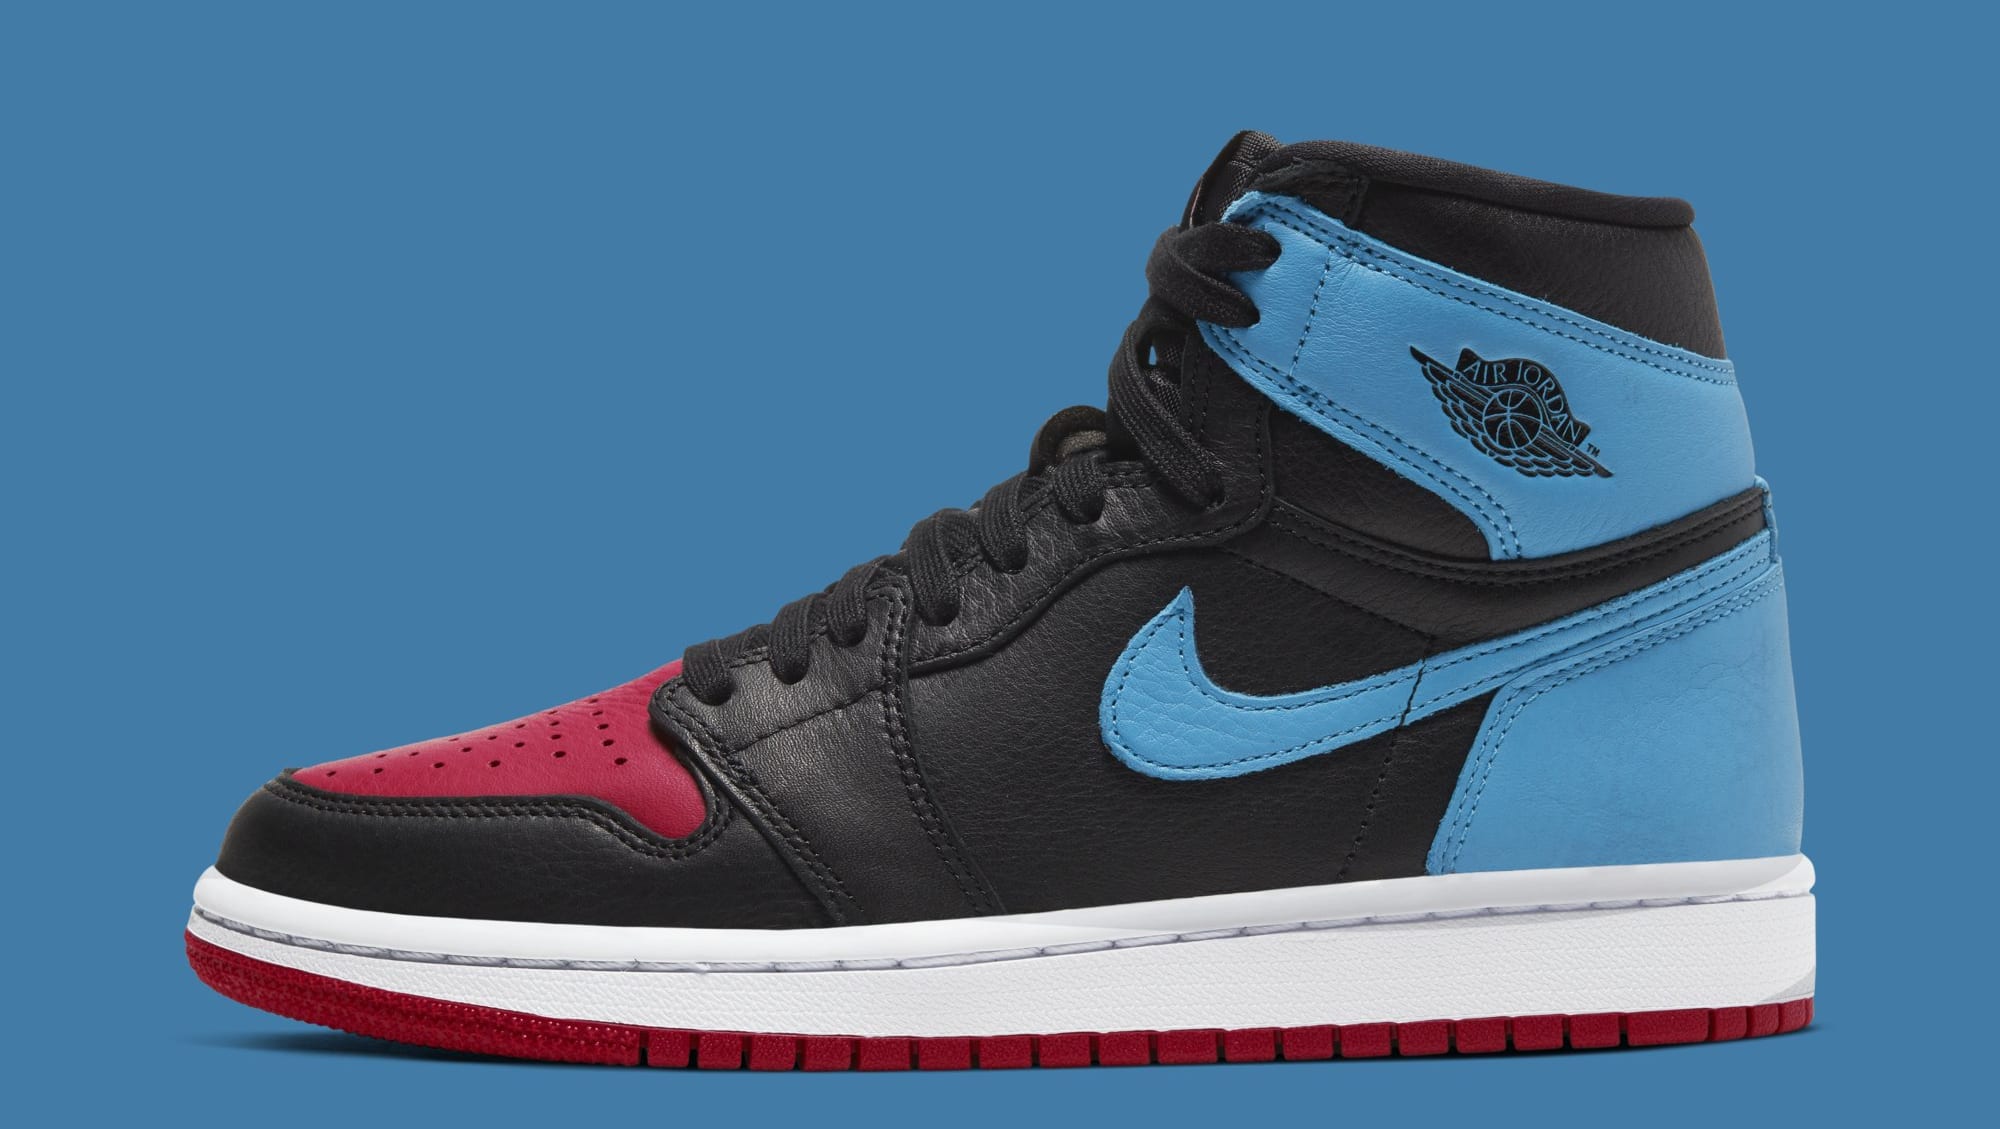 Another 'UNC to Chicago' Air Jordan 1 